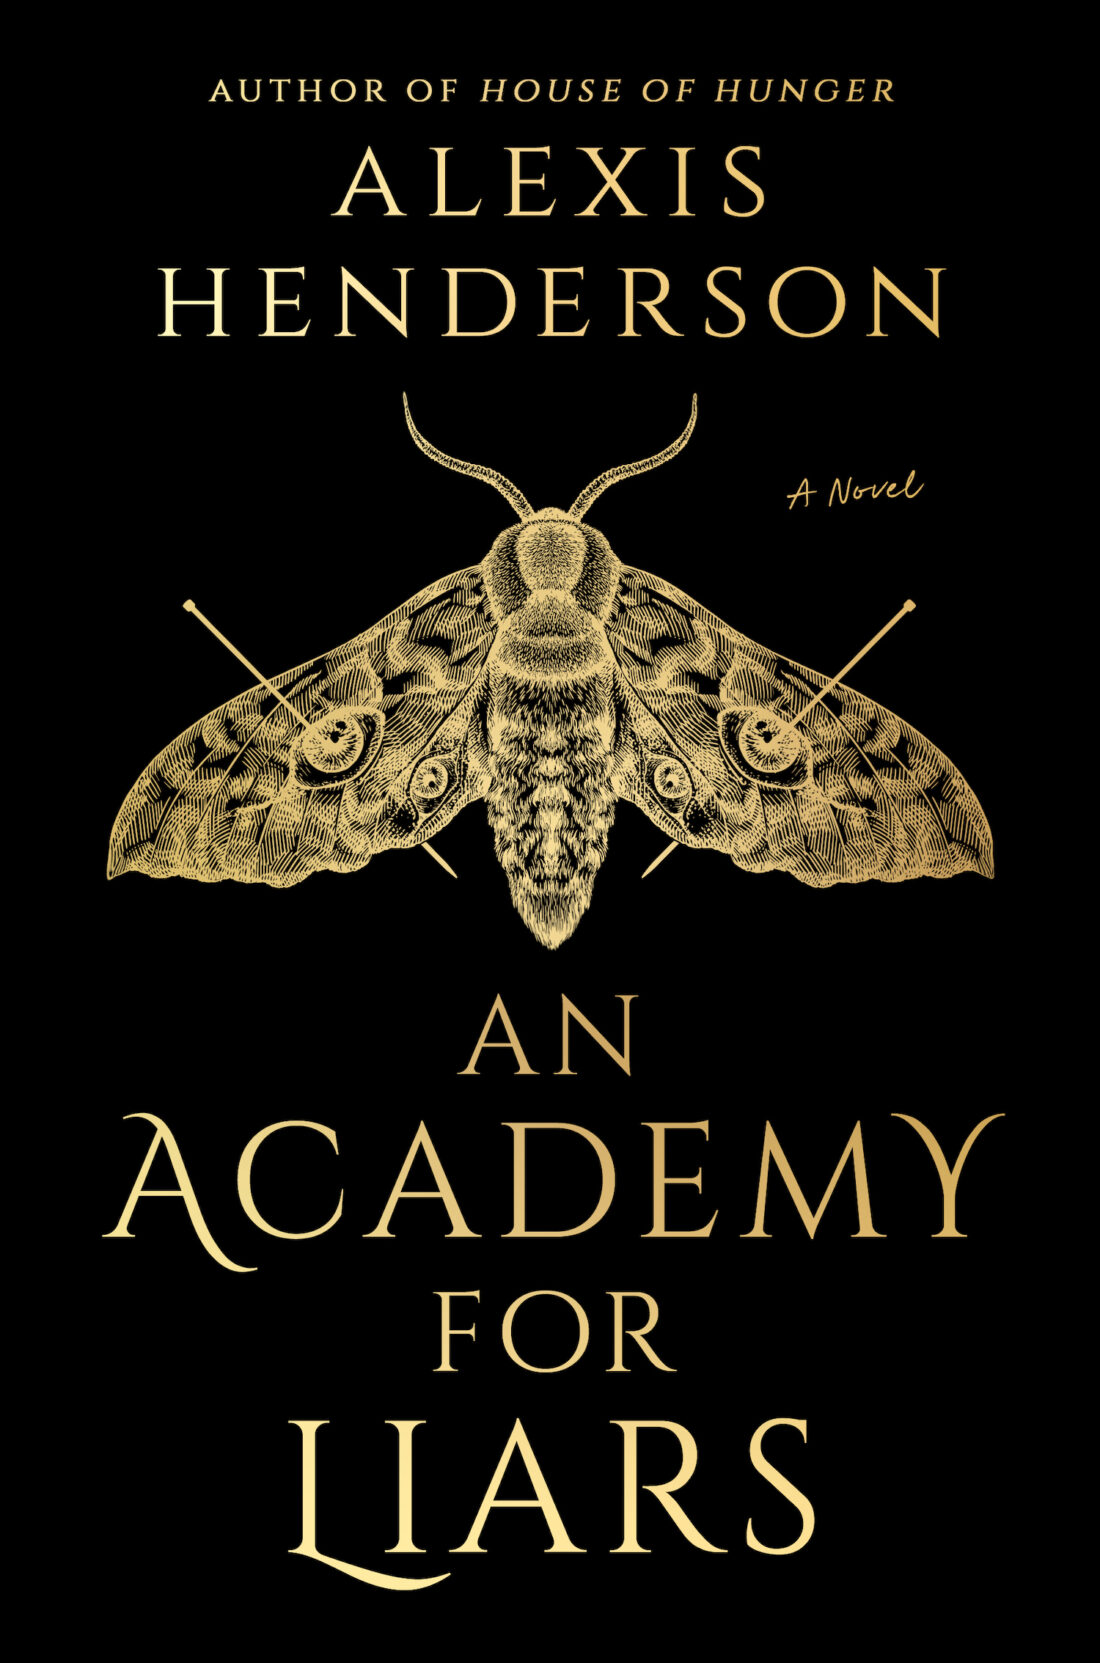 Book cover of Alexis Henderson's An Academy of Liars